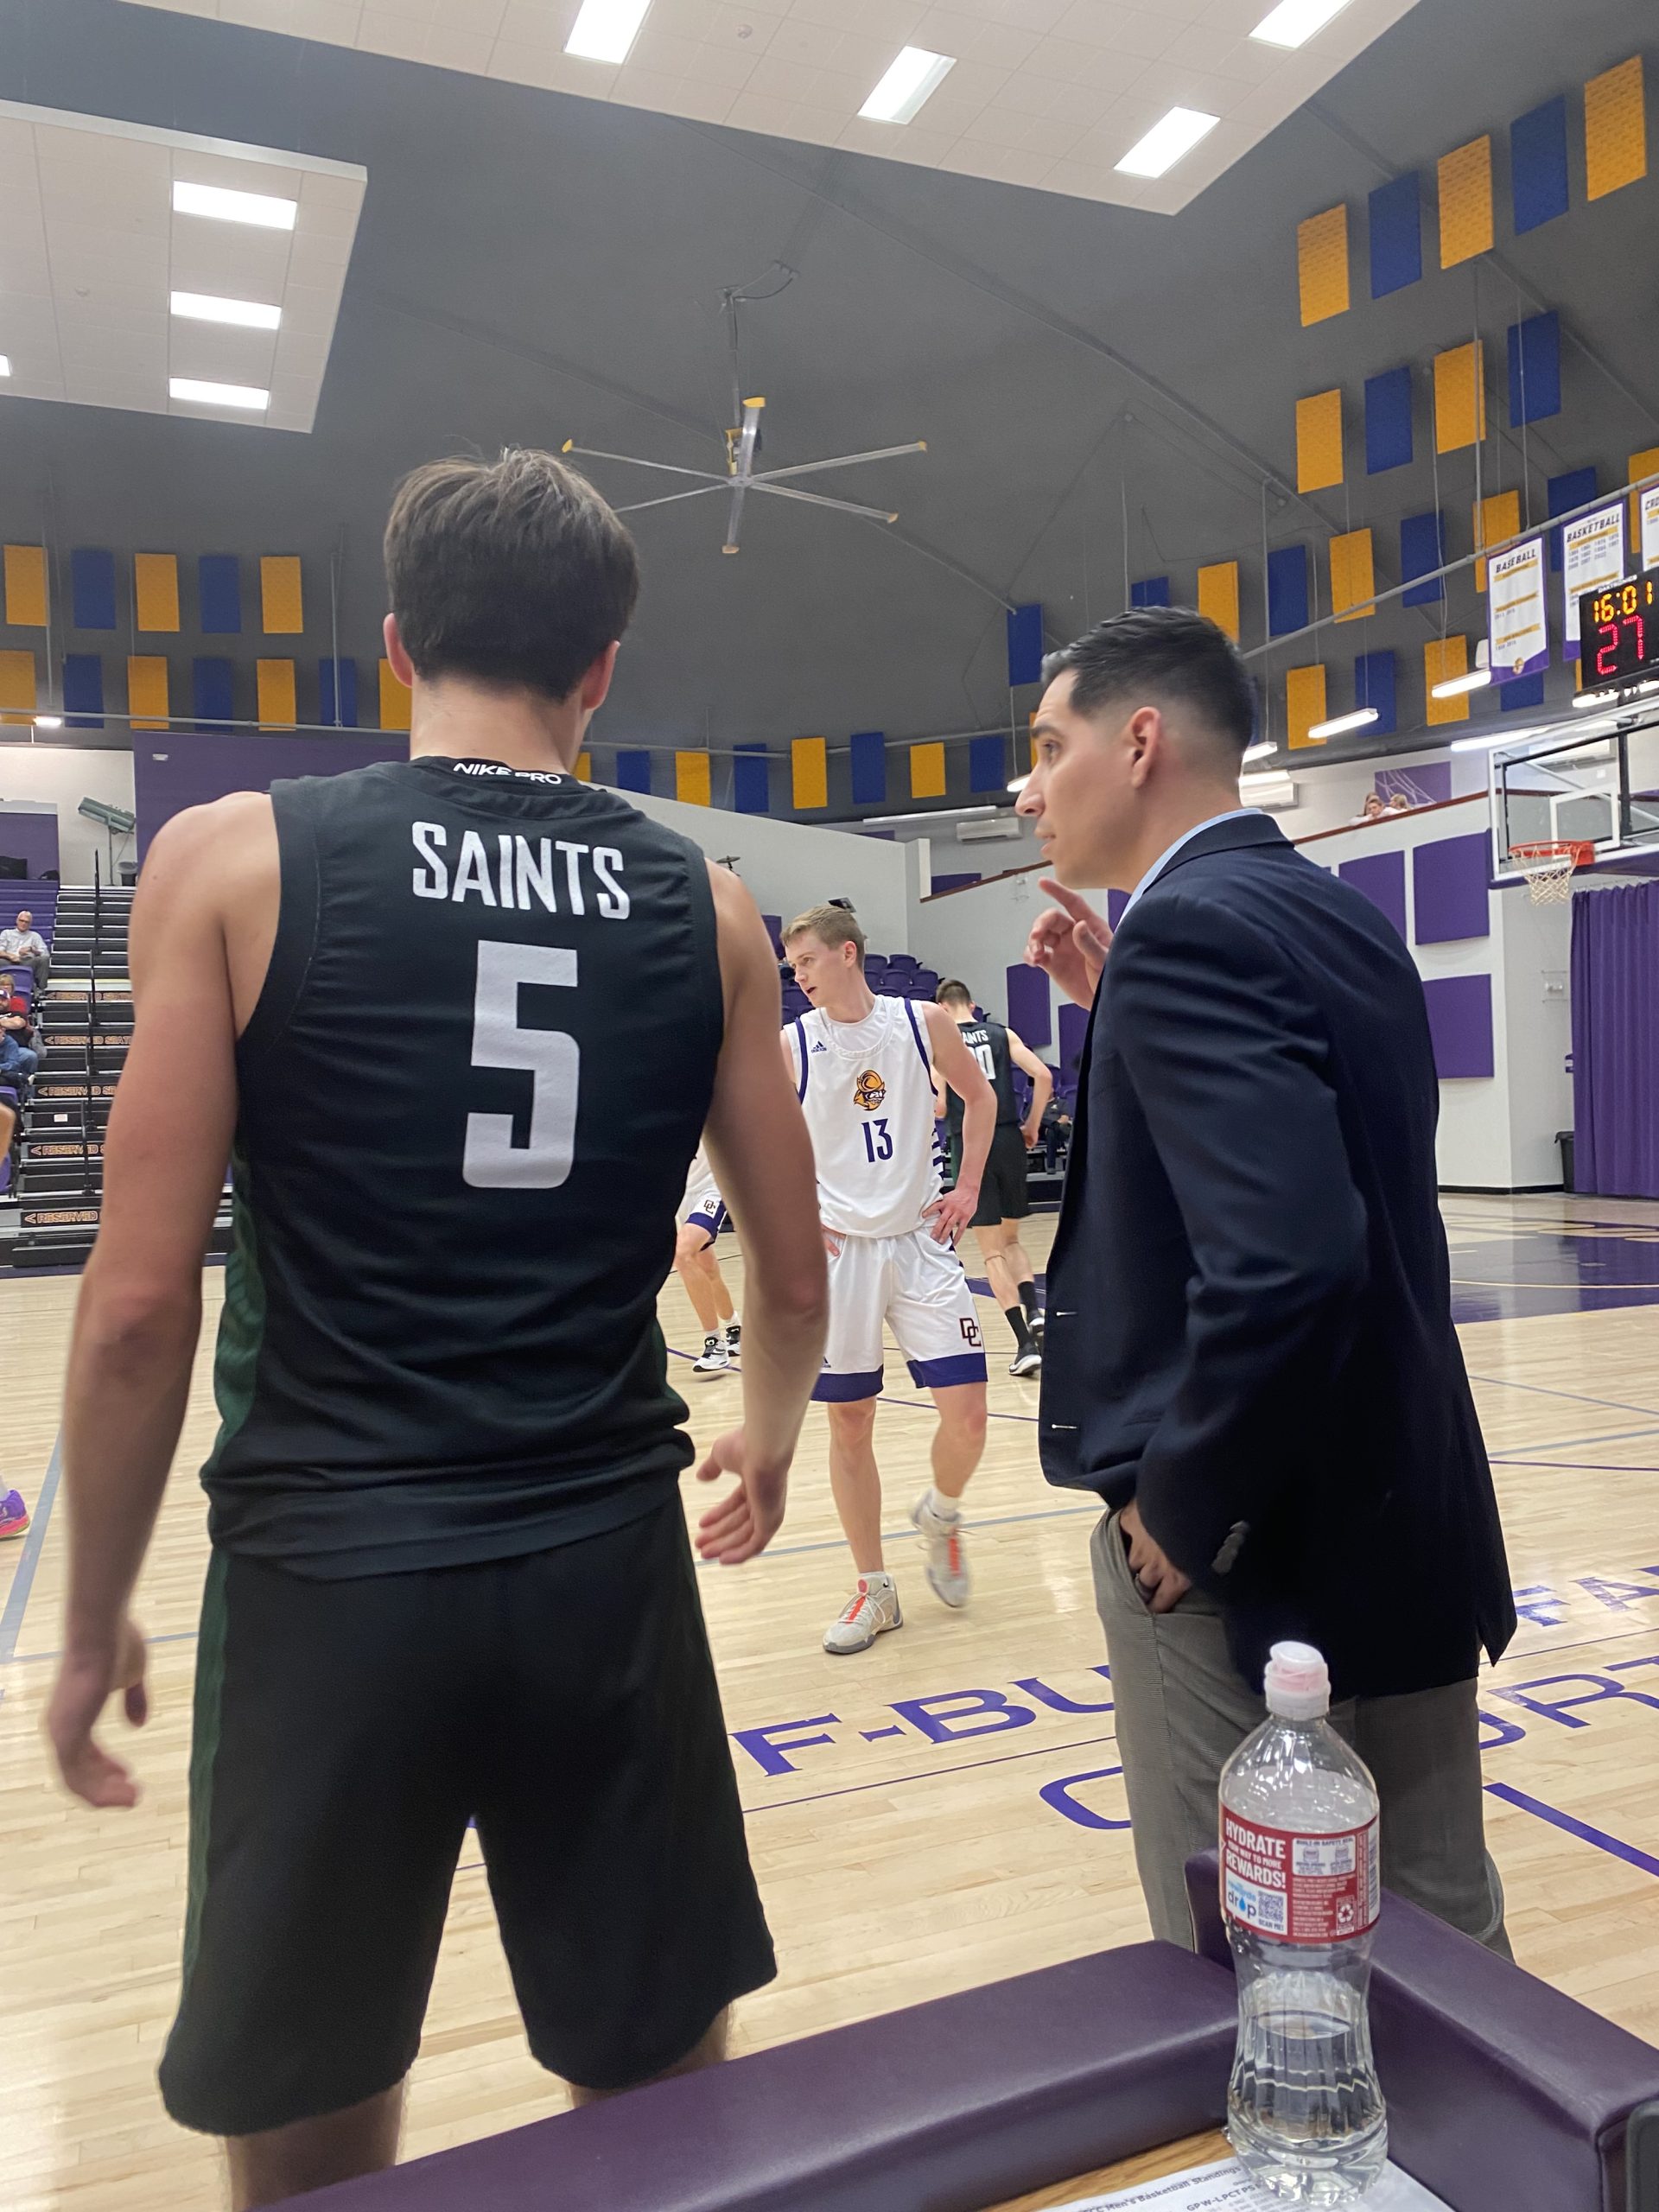 Saints Hold On for Upset Win Over Rival Conqs